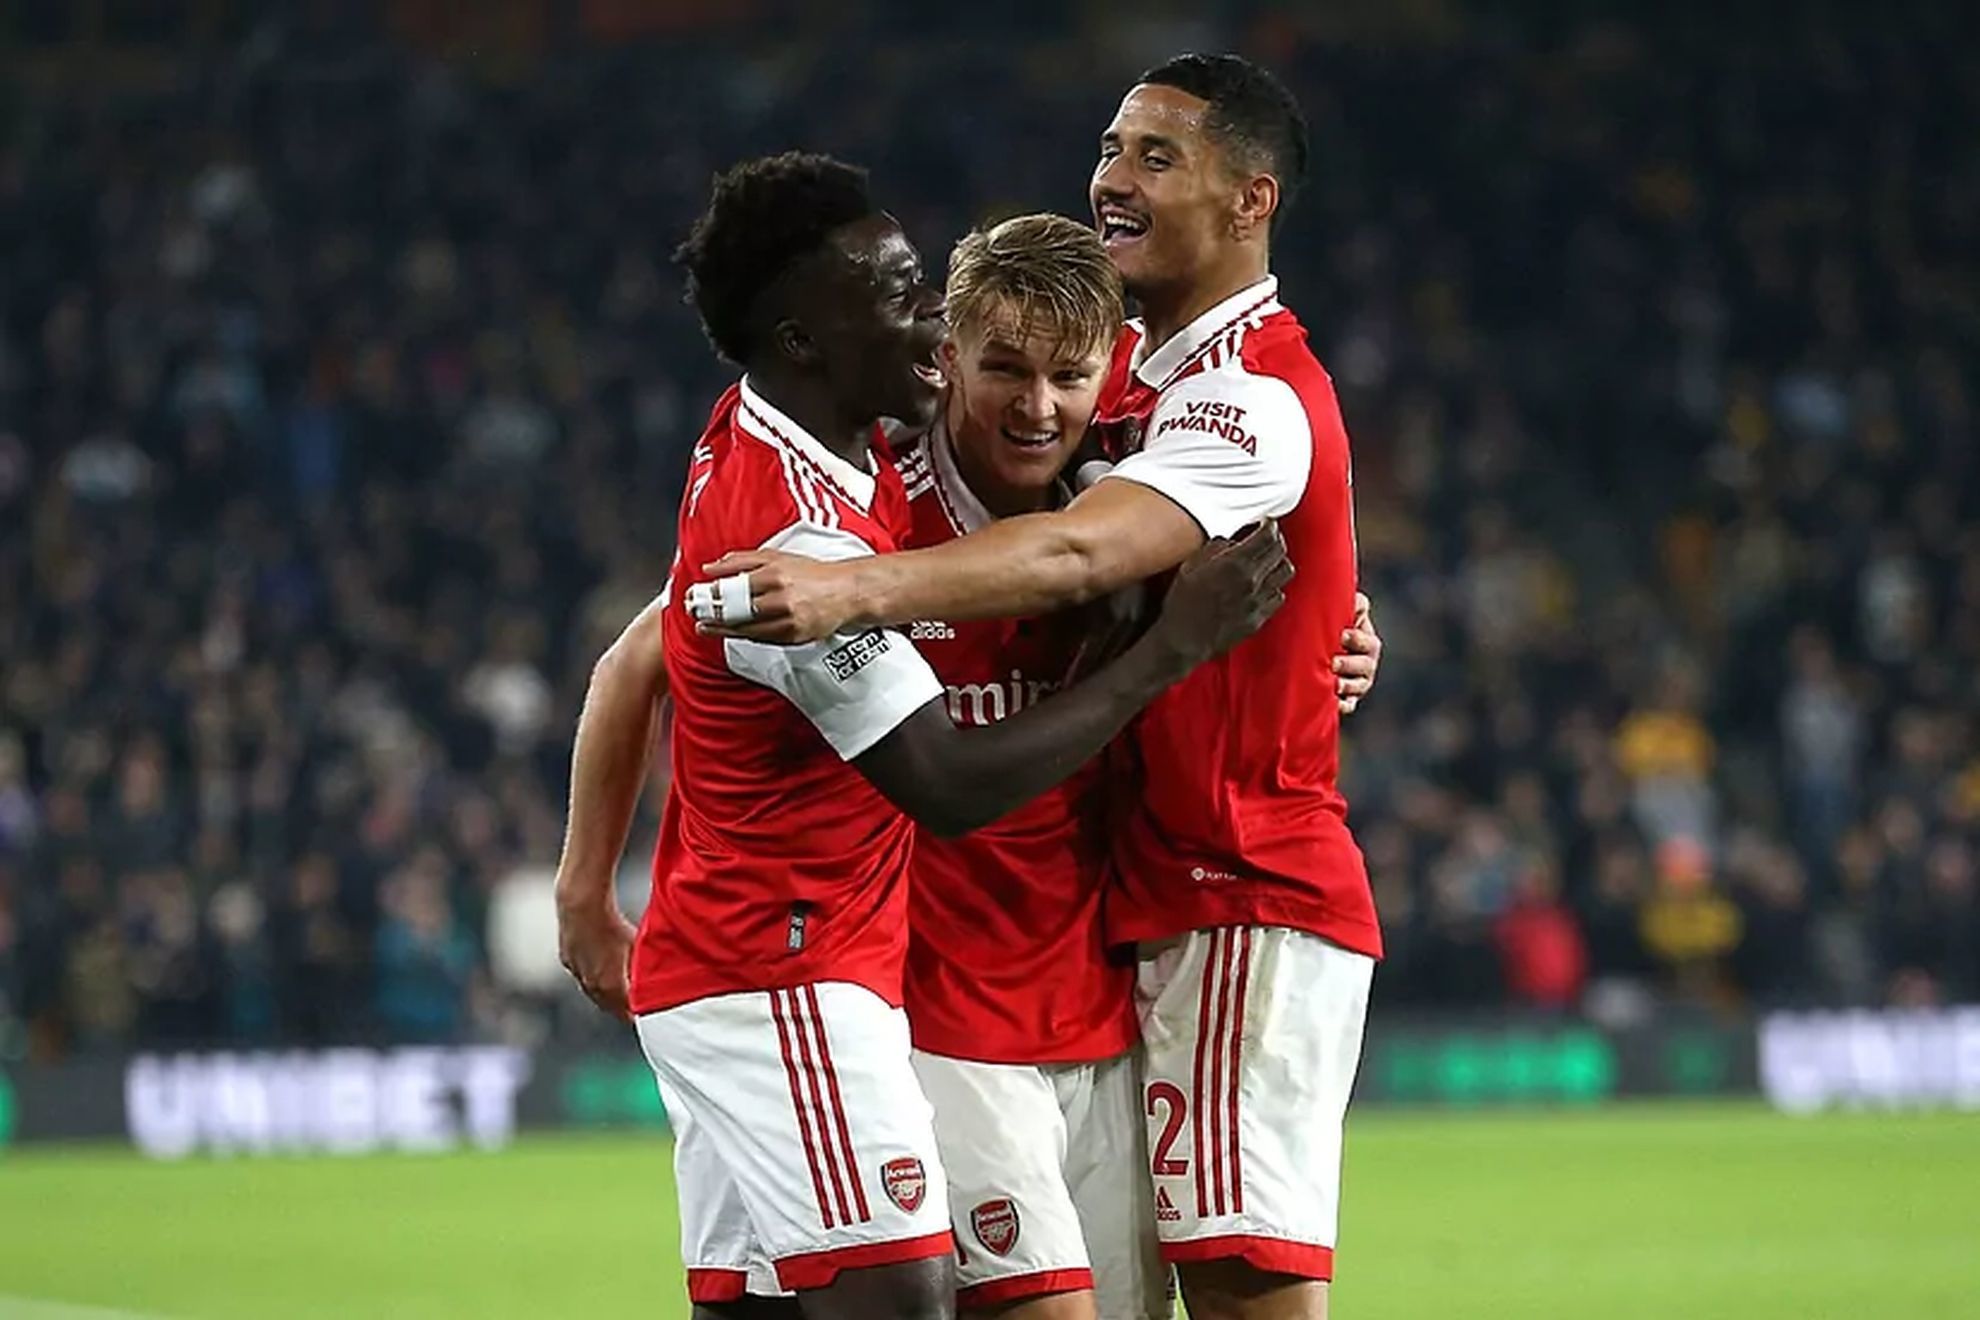 Arsenal celebrate a goal against Wolves